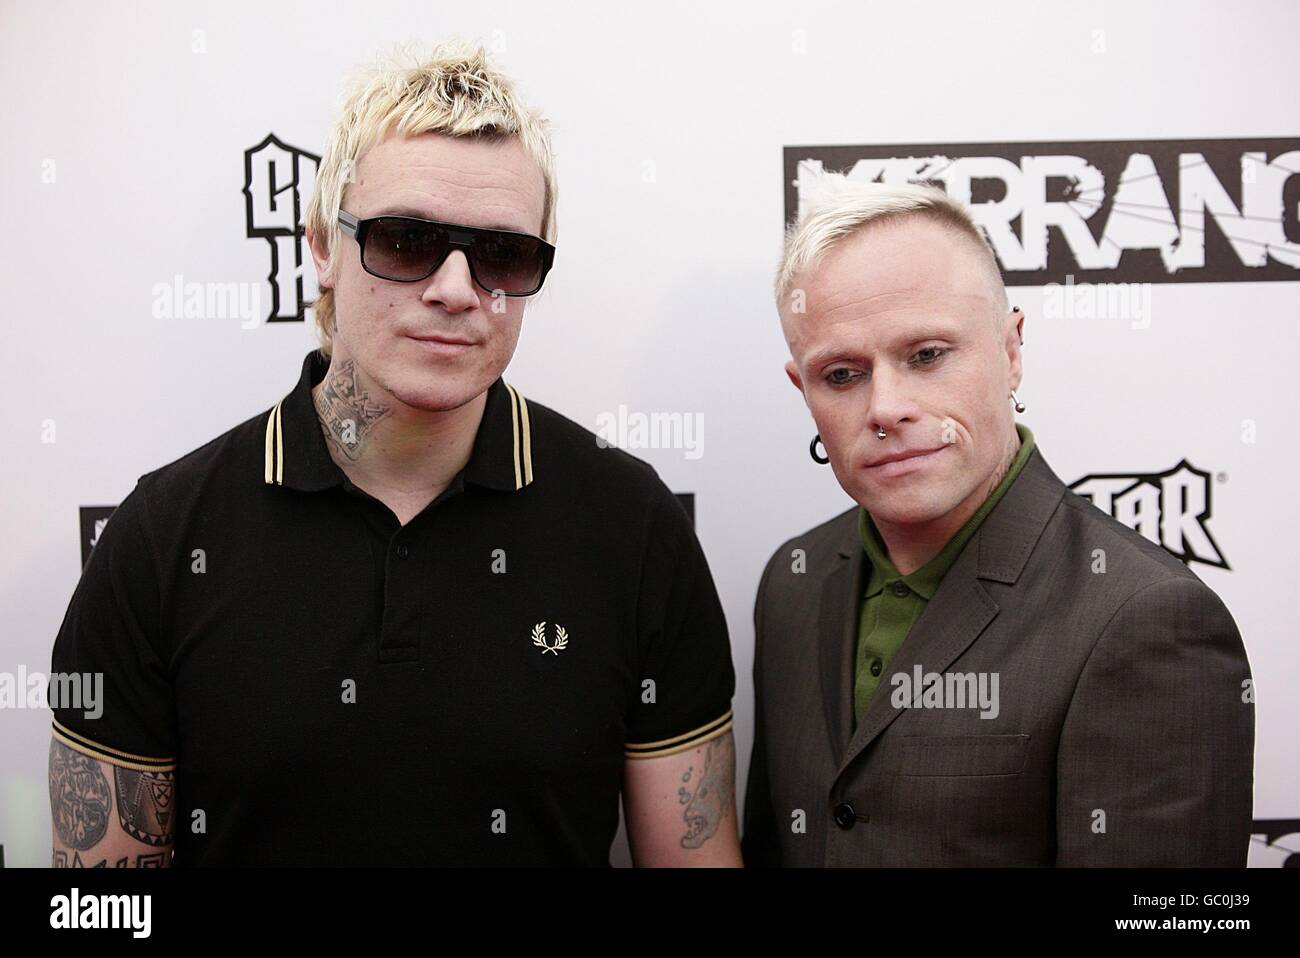 Liam Howlett and Keith Flint (right) of The Prodigy arriving at the Kerrang! Awards, at the Brewery, London. PRESS ASSOCIATION Photo. Picture date: Monday August 3, 2009. Photo credit should read: Yui Mok/PA Wire Stock Photo